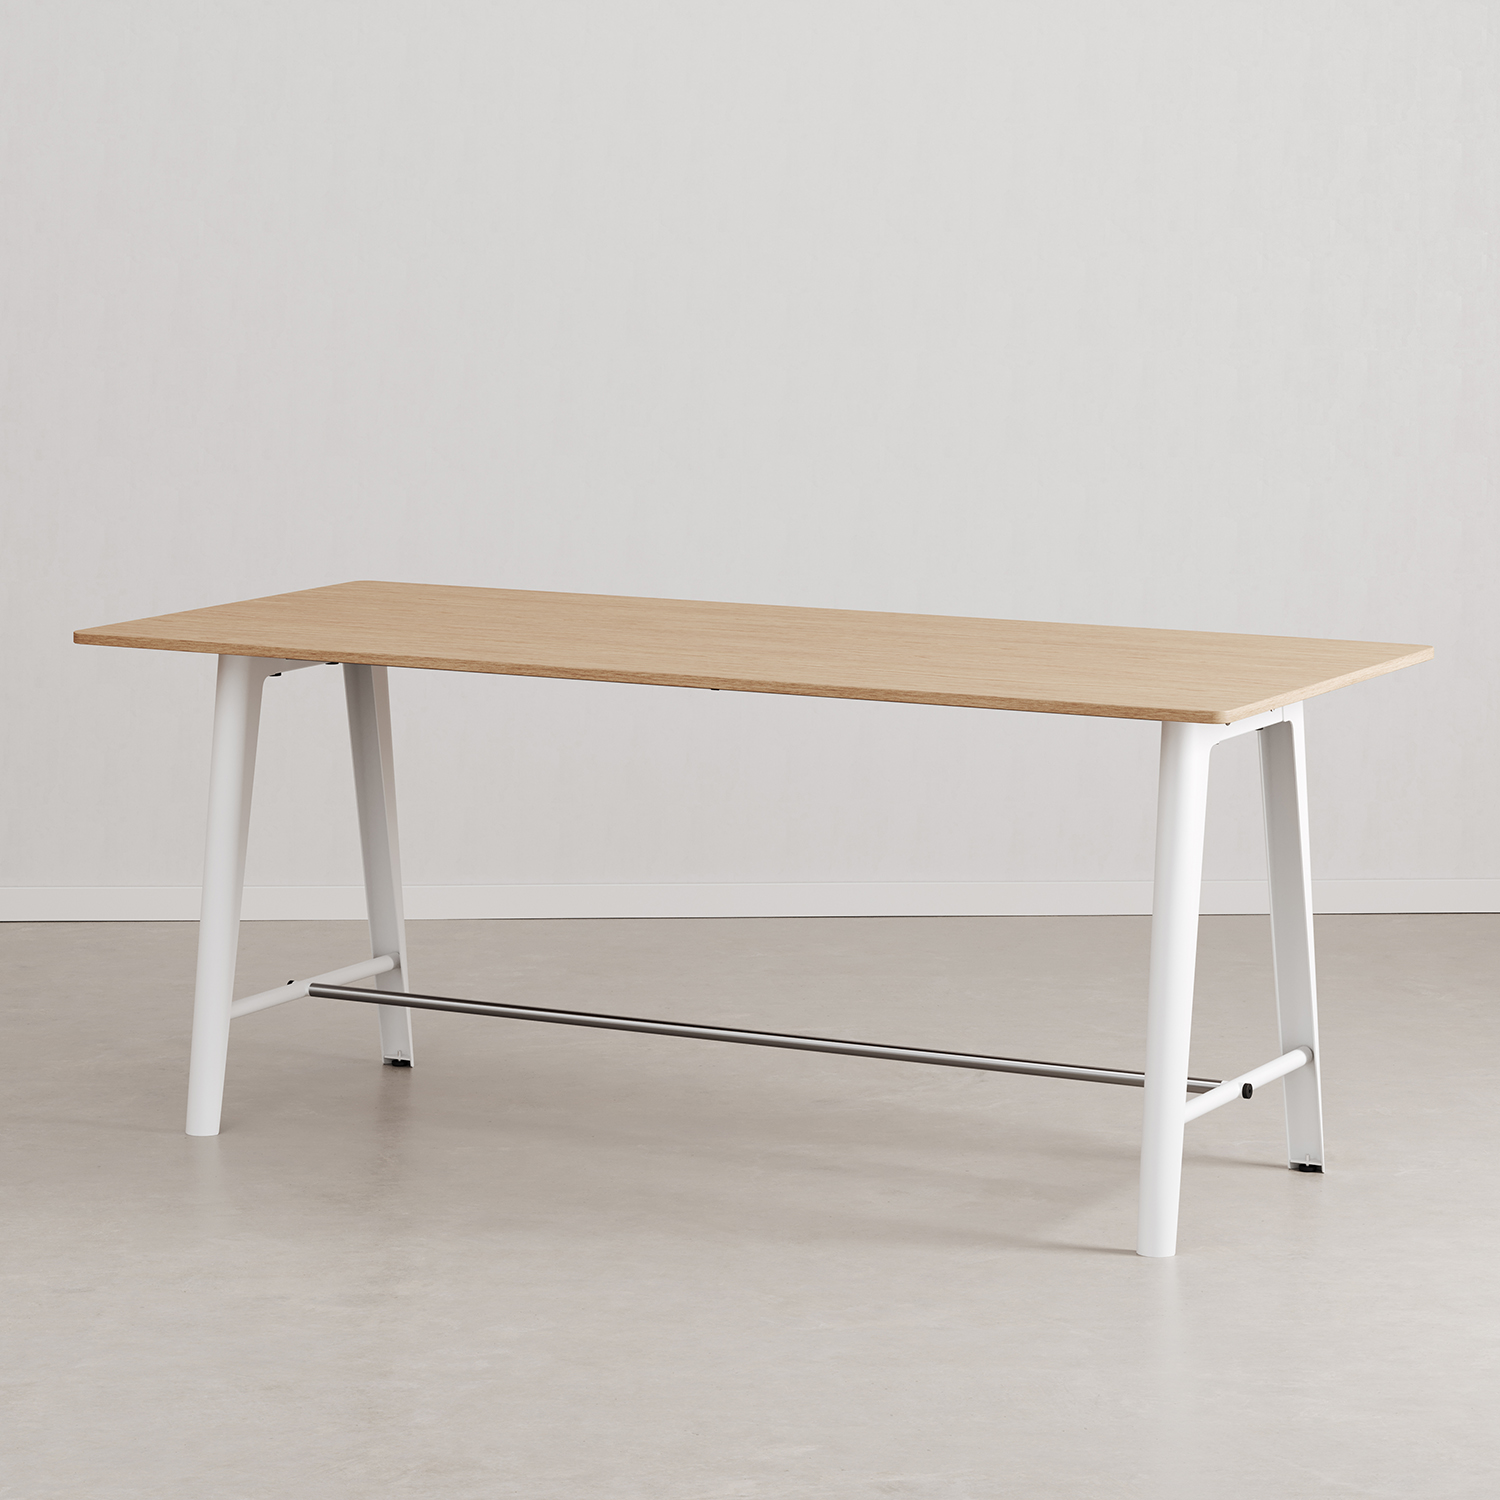 NEW MODERN high table - height 90 or 105cm - eco-certified wood